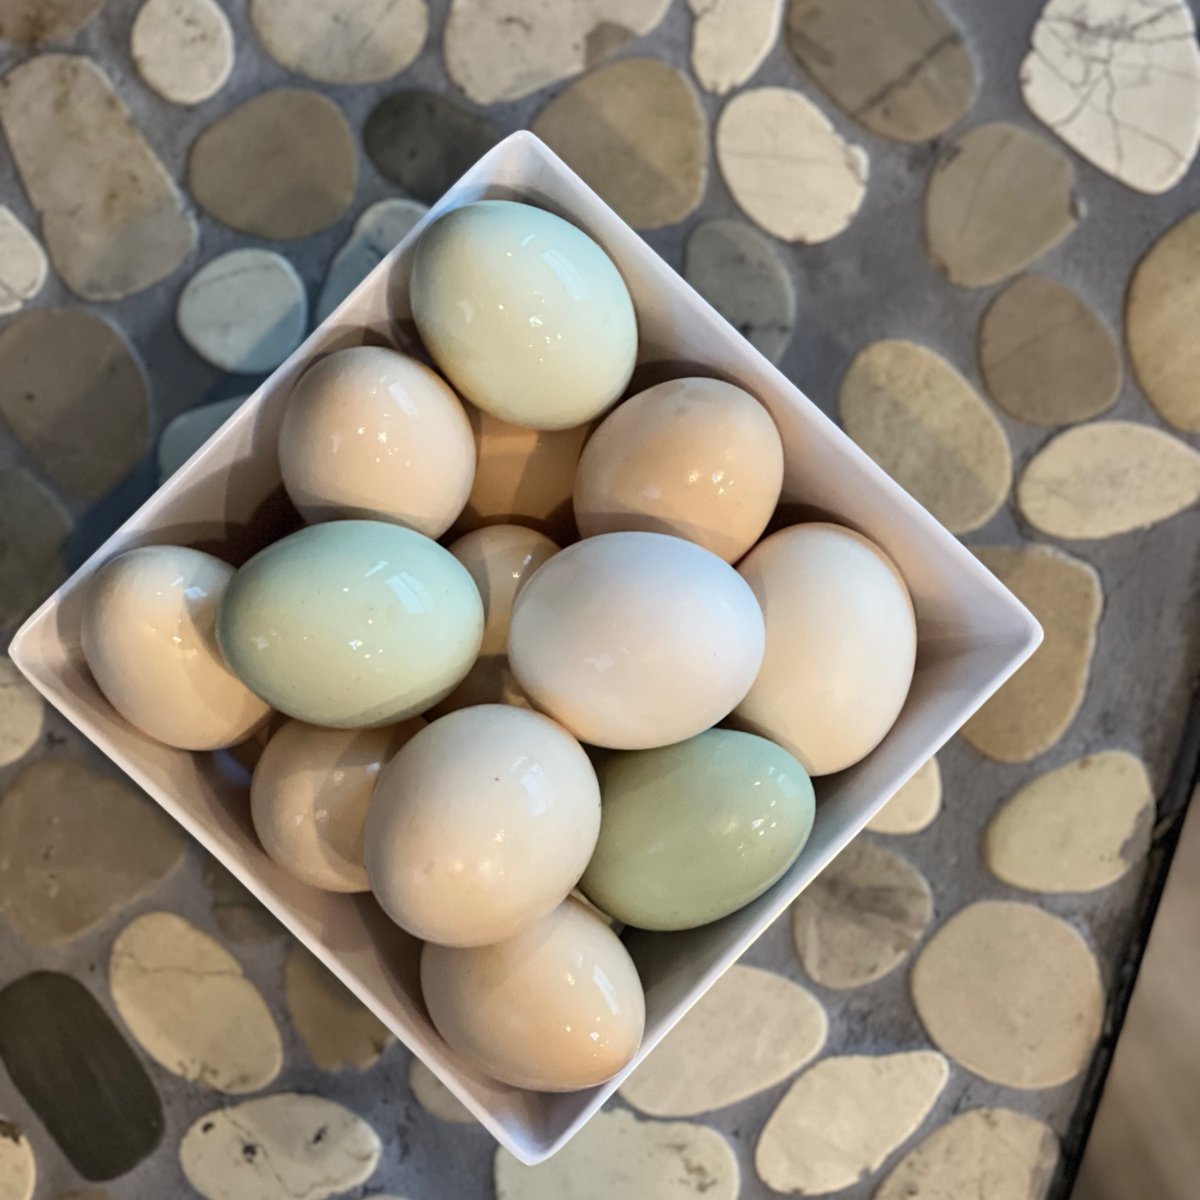 🐓🥚Check out these stunning eggs that Shannon collected from the neighbour’s chickens. We love Vancouver Island so much 💖 Have a great Monday everyone!
#trimlightvanisle #permanentholidaylights #yearroundlighting #securitylighting  #energyefficient #lifetimewarranty